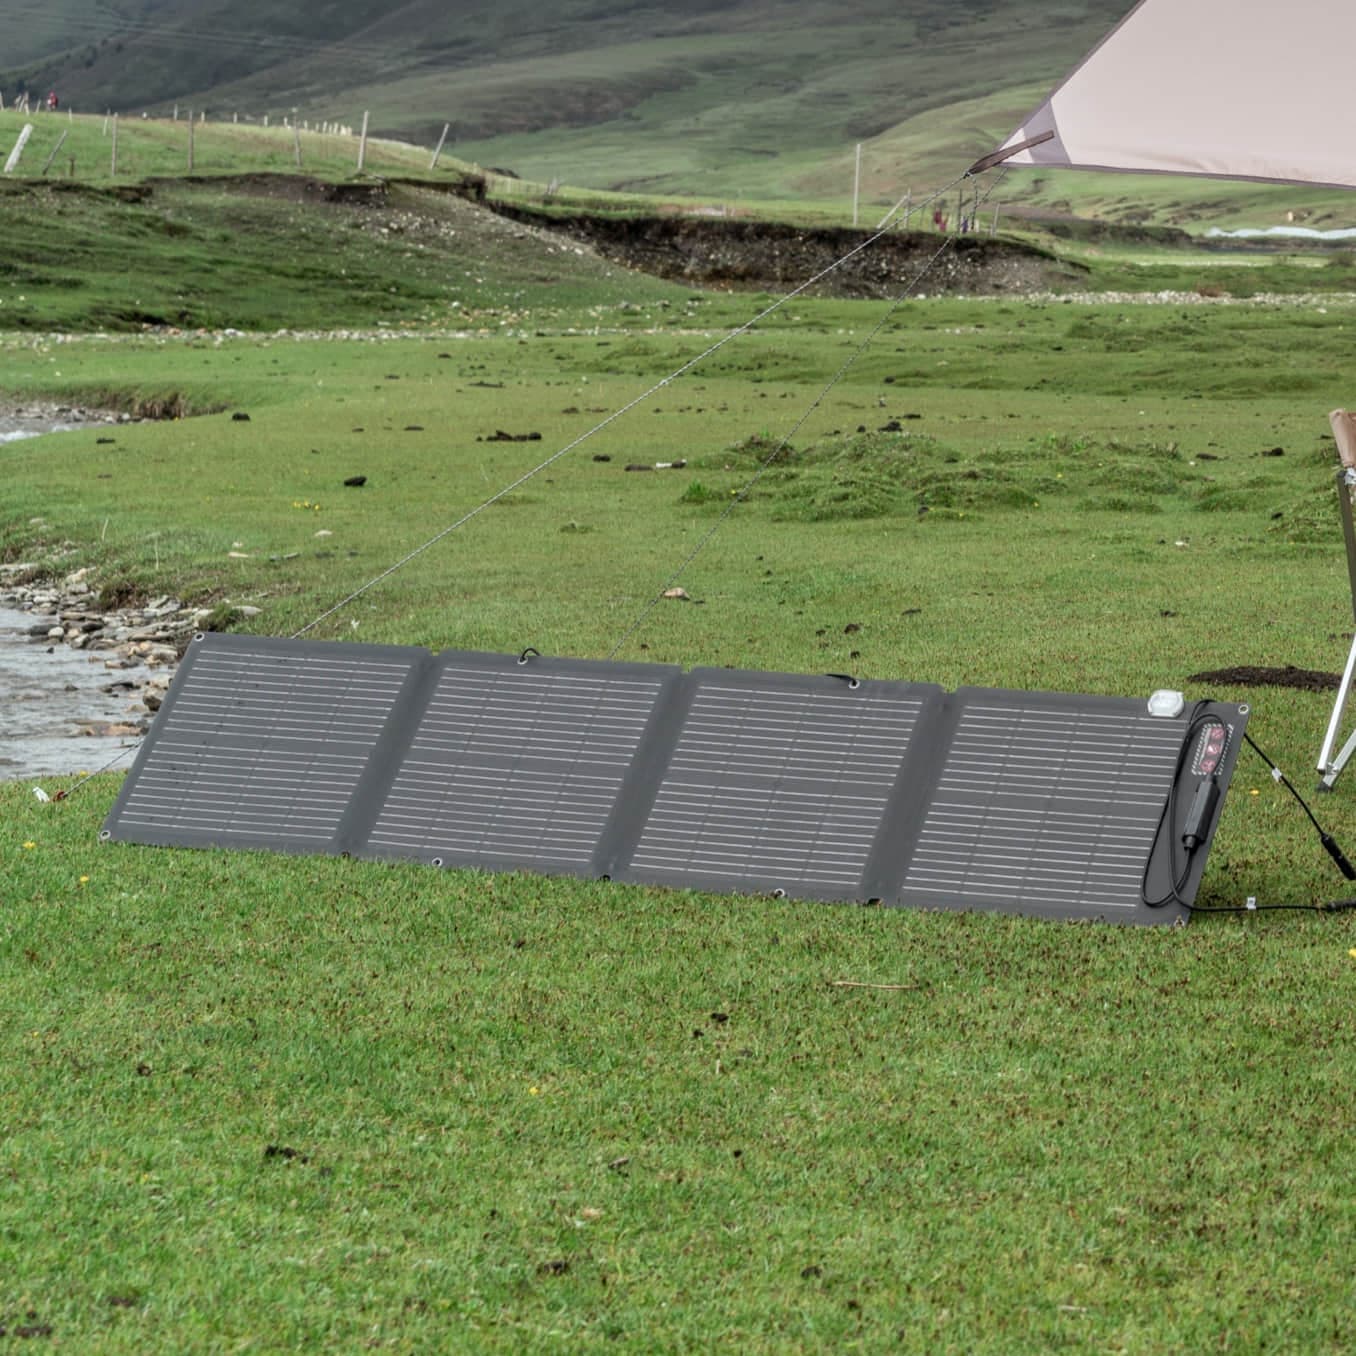 The EcoFlow 110W Portable Solar Panel is set up in the grass next to a tent.